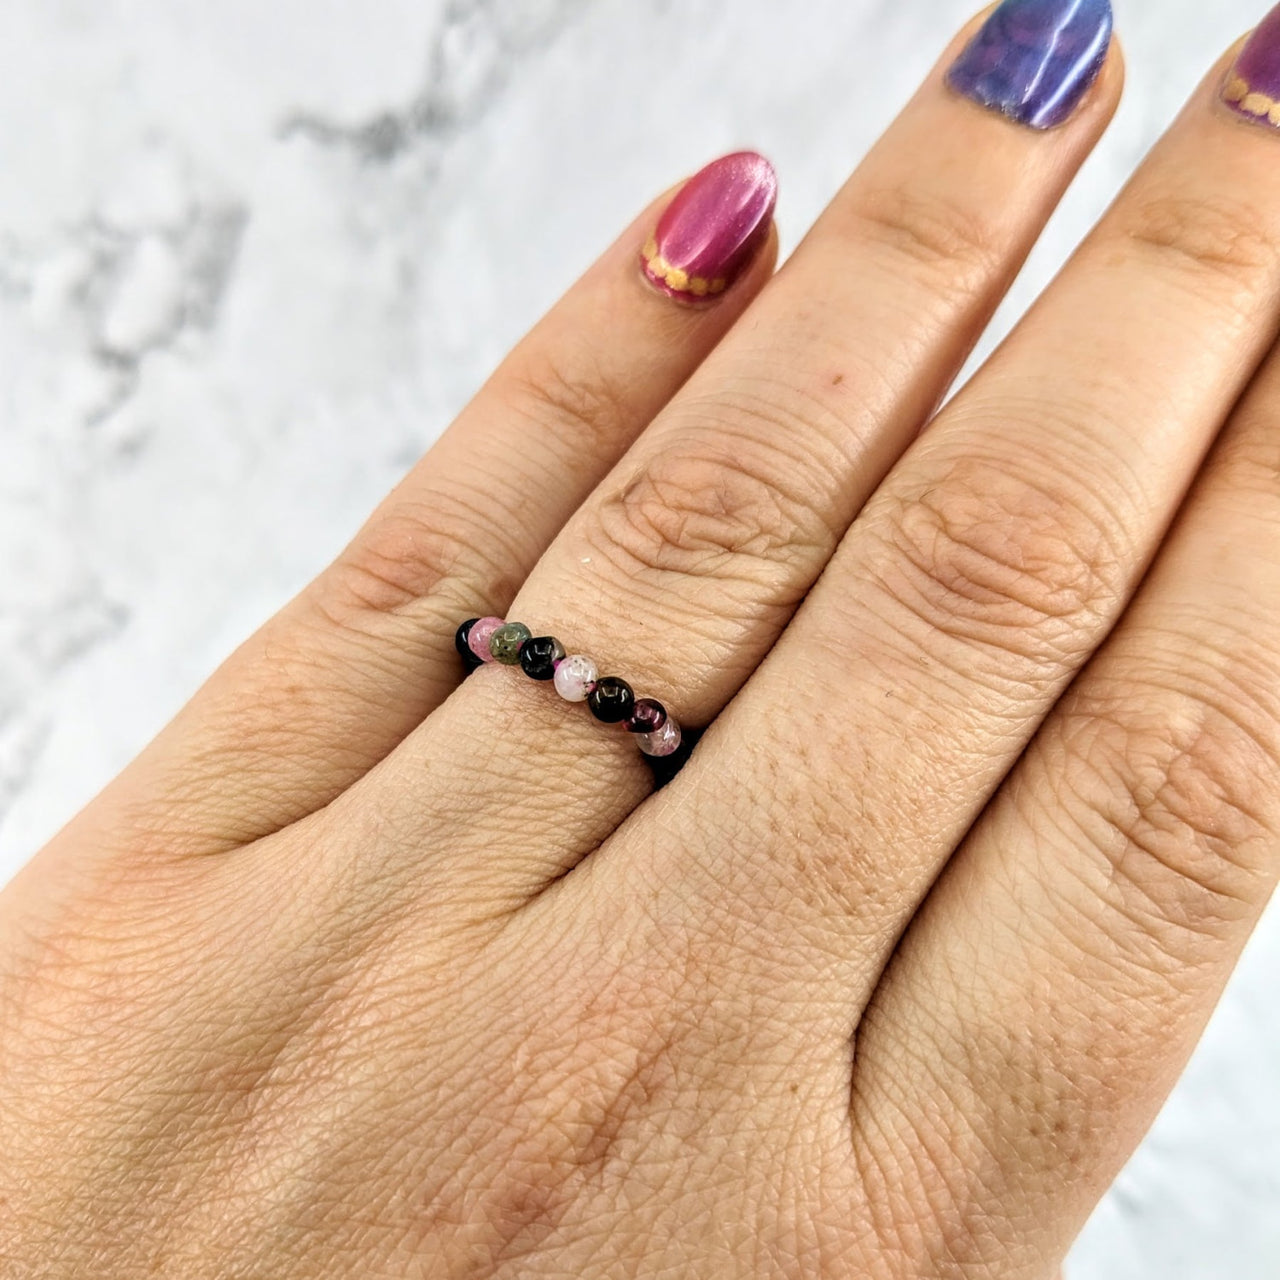 Woman’s hand wearing Tourmaline Mixed Beaded Stretchy Ring #LV1970 in purple and black